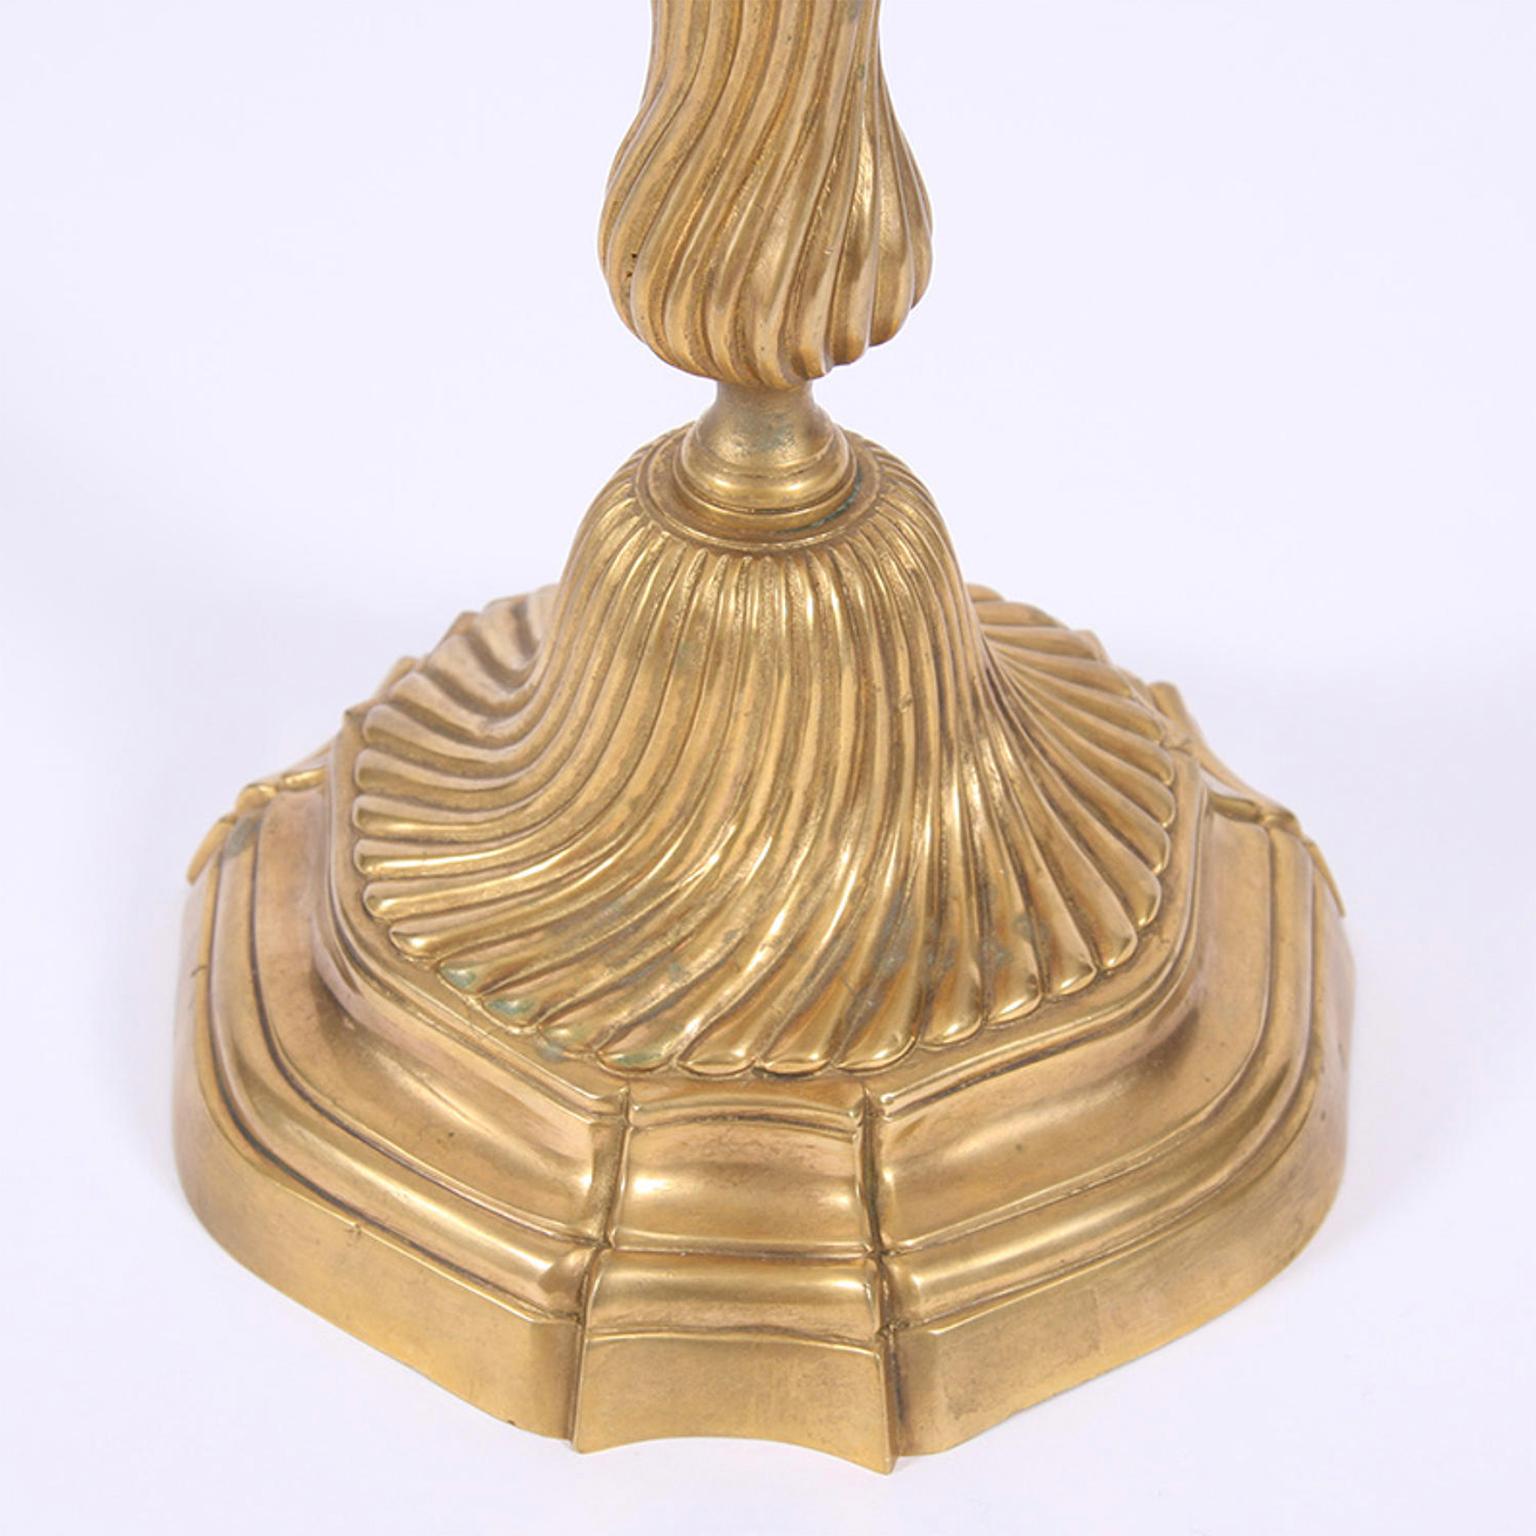 A lovely pair of gilded metal candlesticks with an unusual and very elegant swirl design.